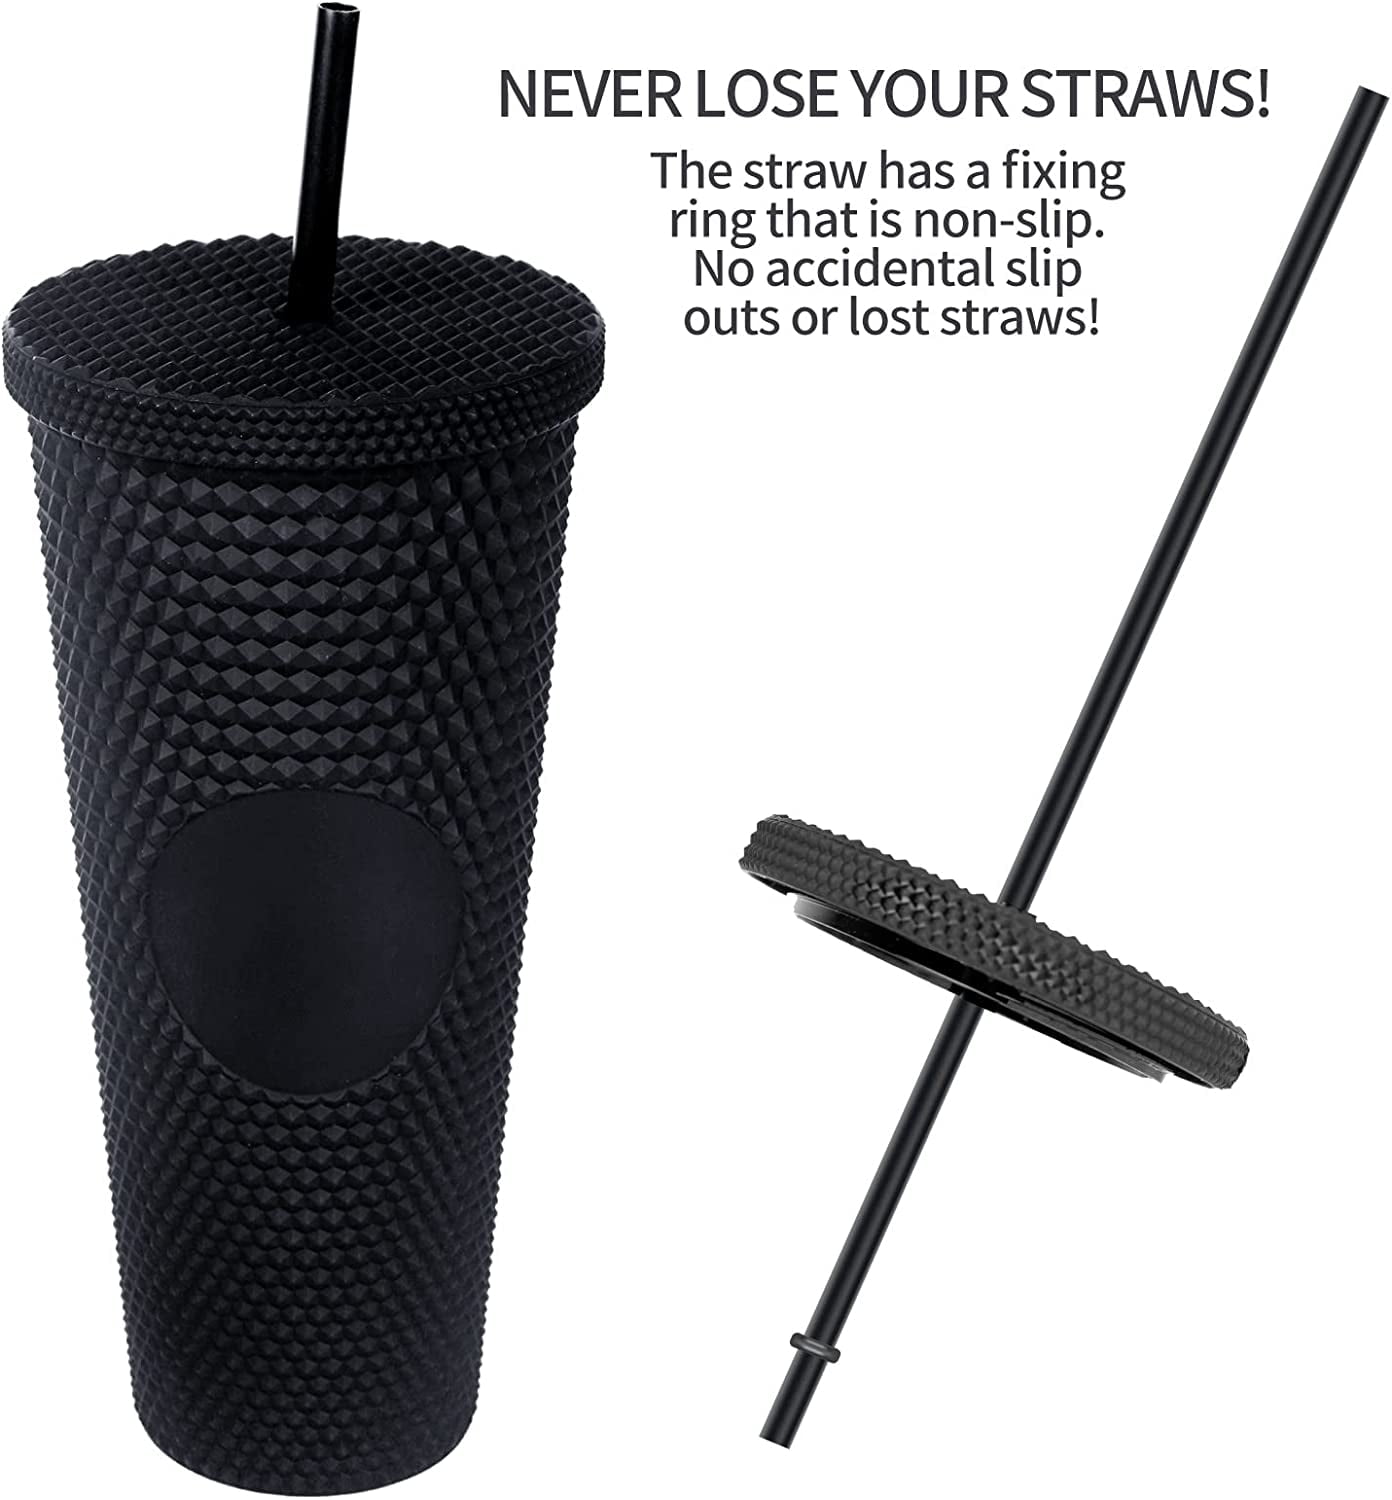 Cafezi Studded Tumbler with Lid and Straw, 24oz Reusable  Double Wall Matte Iced Coffee Cup Smoothie Cup Travel Mug - For Cold Only,  BPA Free, Wide Mouth for Easy Cleaning - (